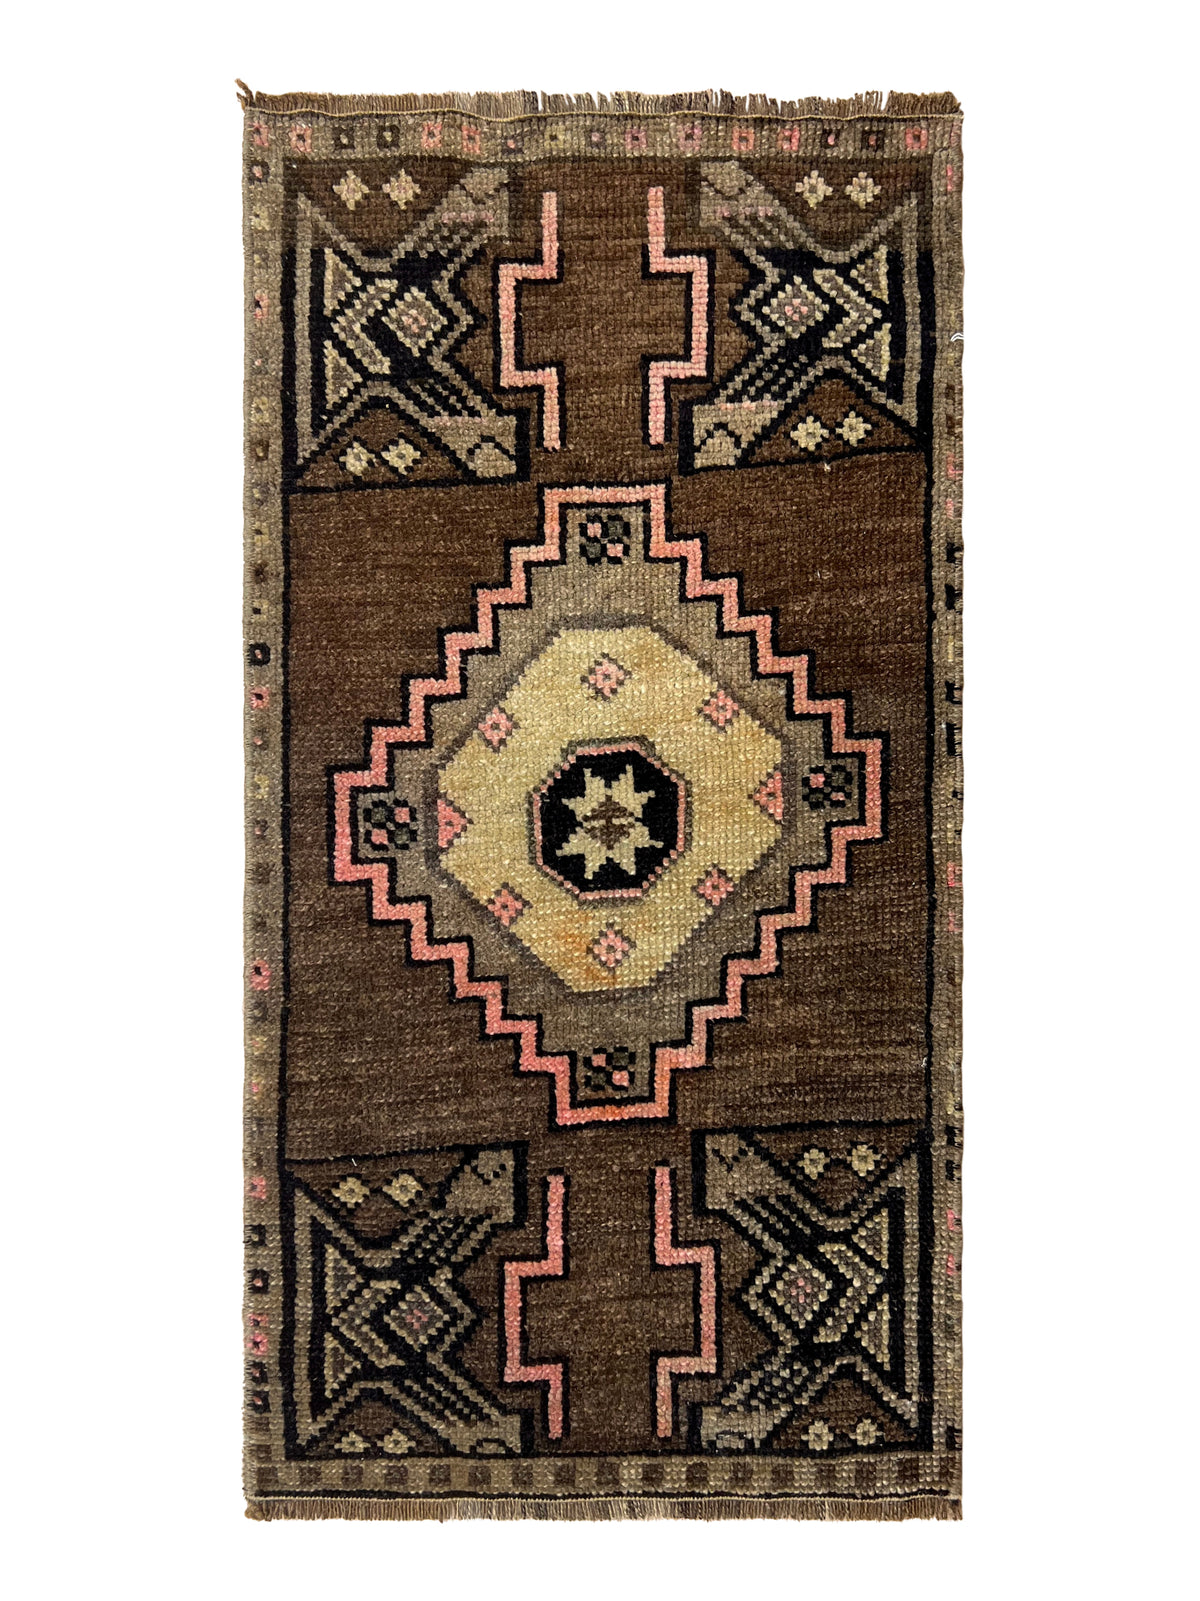 McLaglen Updated Traditional Blue Area Rug World Menagerie Rug Size: Rectangle 7'10 x 10'3